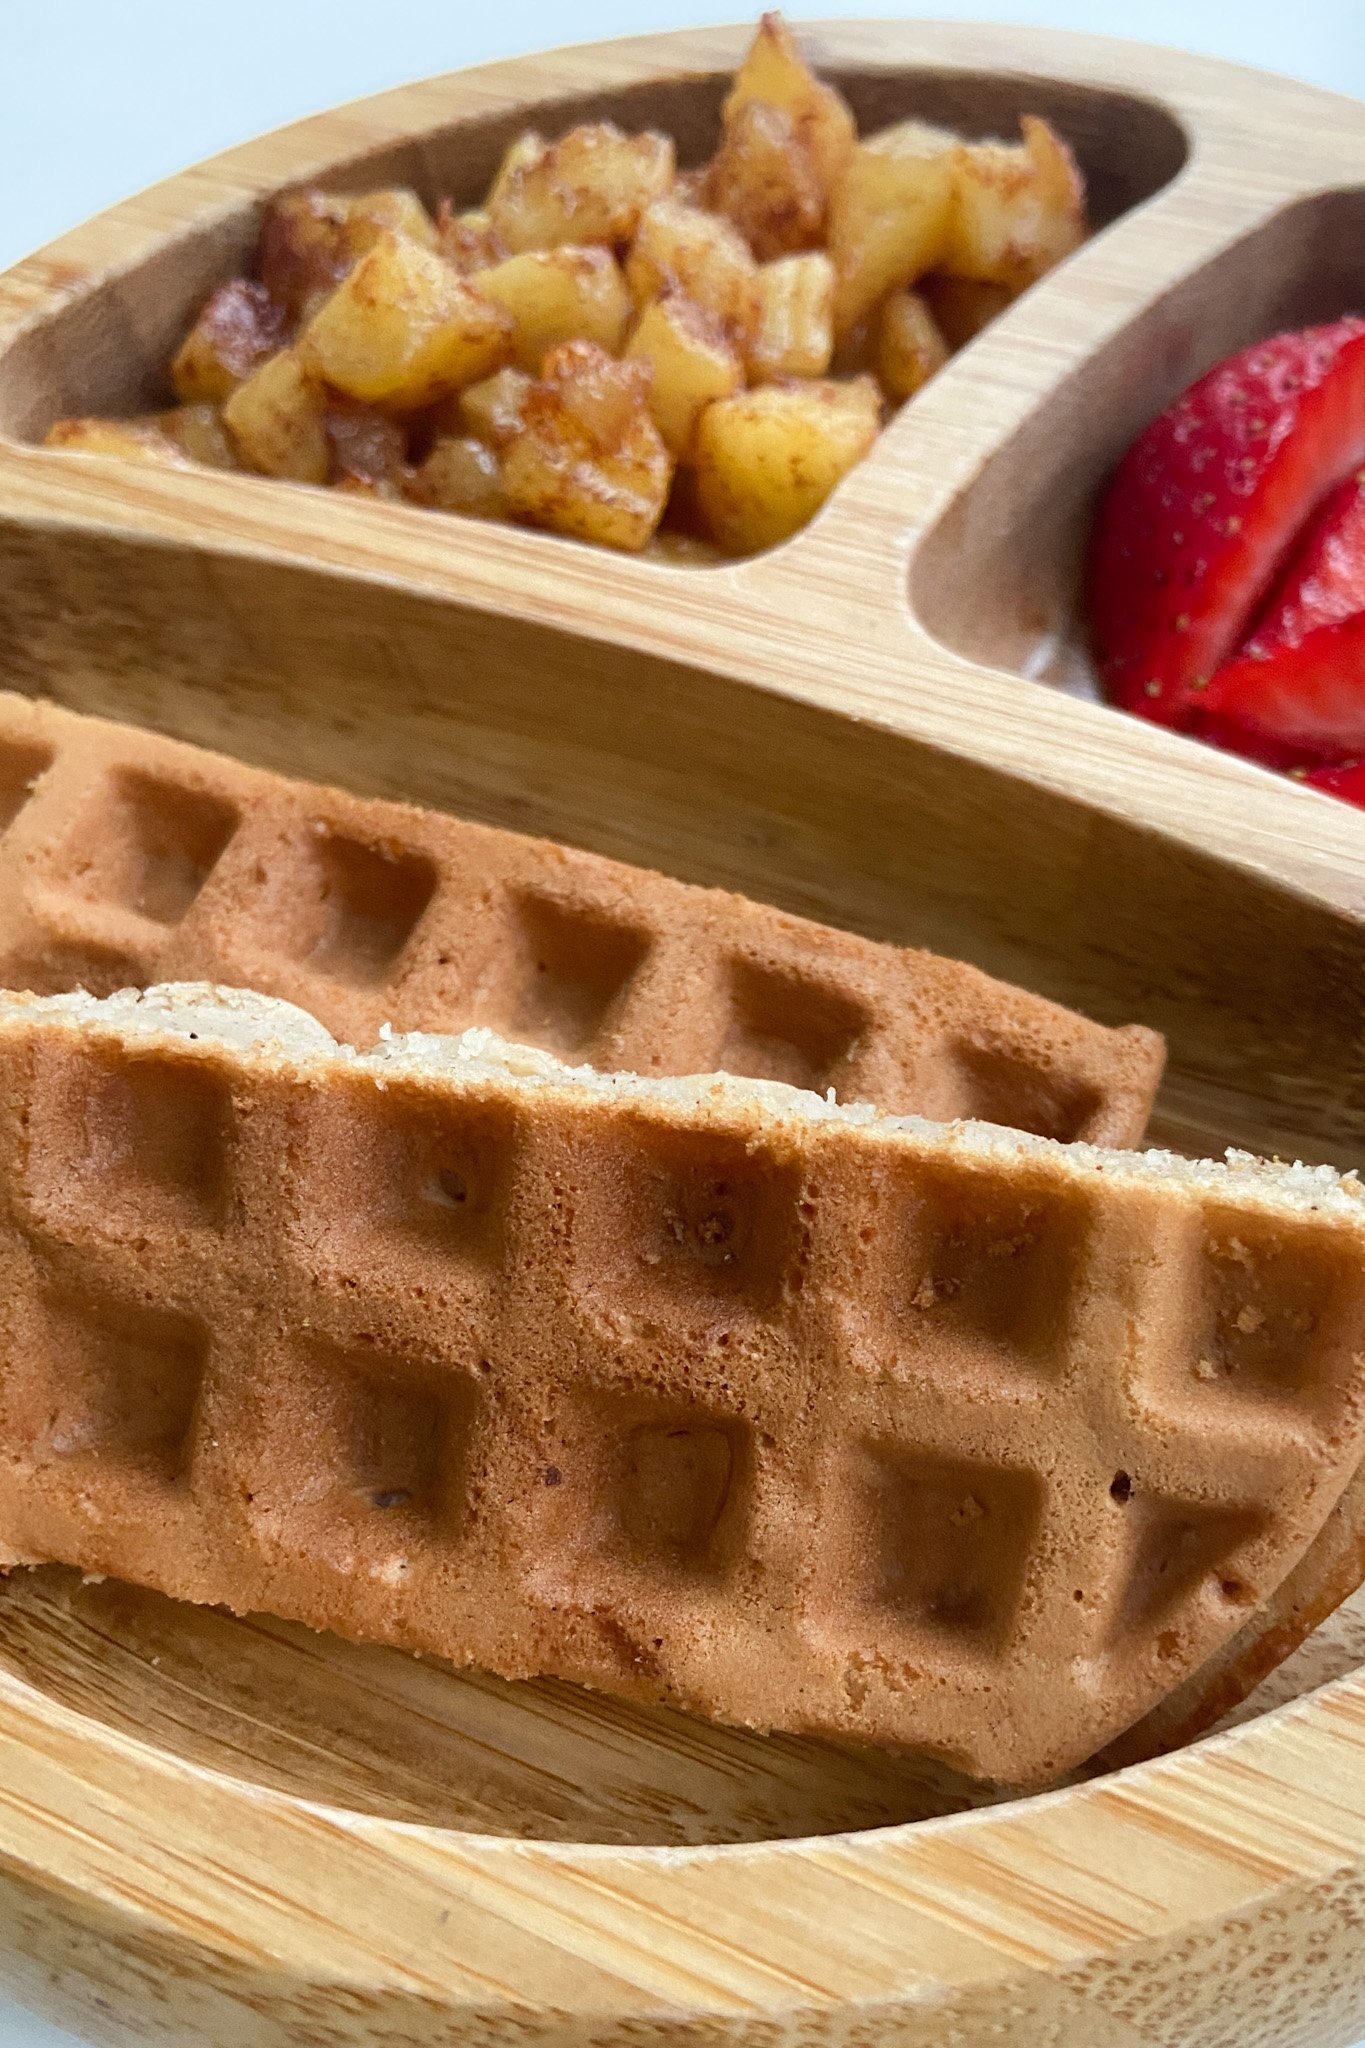 Cinnamon apple waffles served with cinnamon apples and sliced strawberries